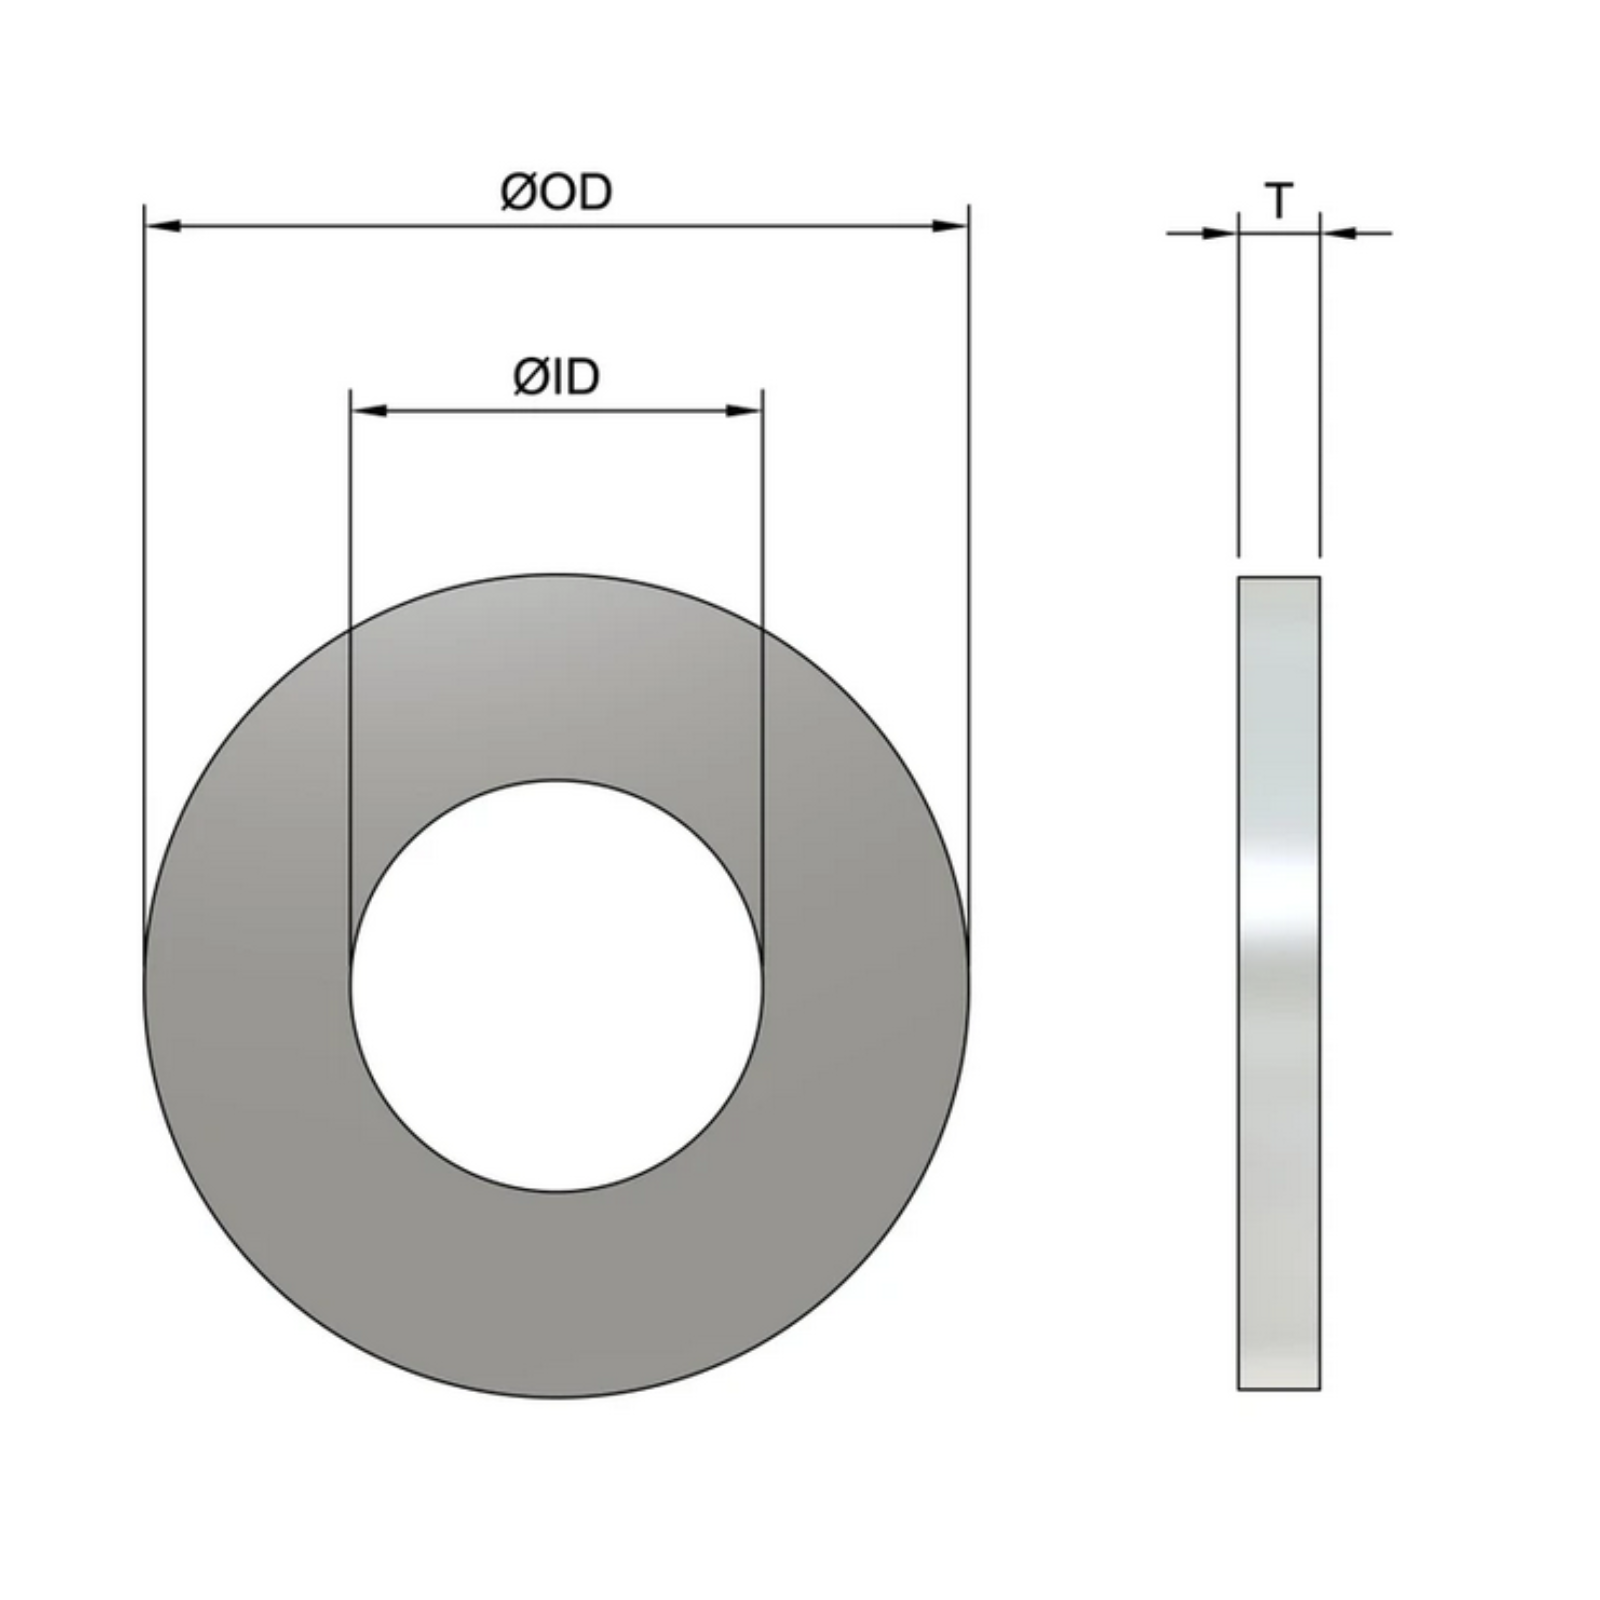 M12 Form A Flat Washers (DIN 125) - Stainless Steel (A2)